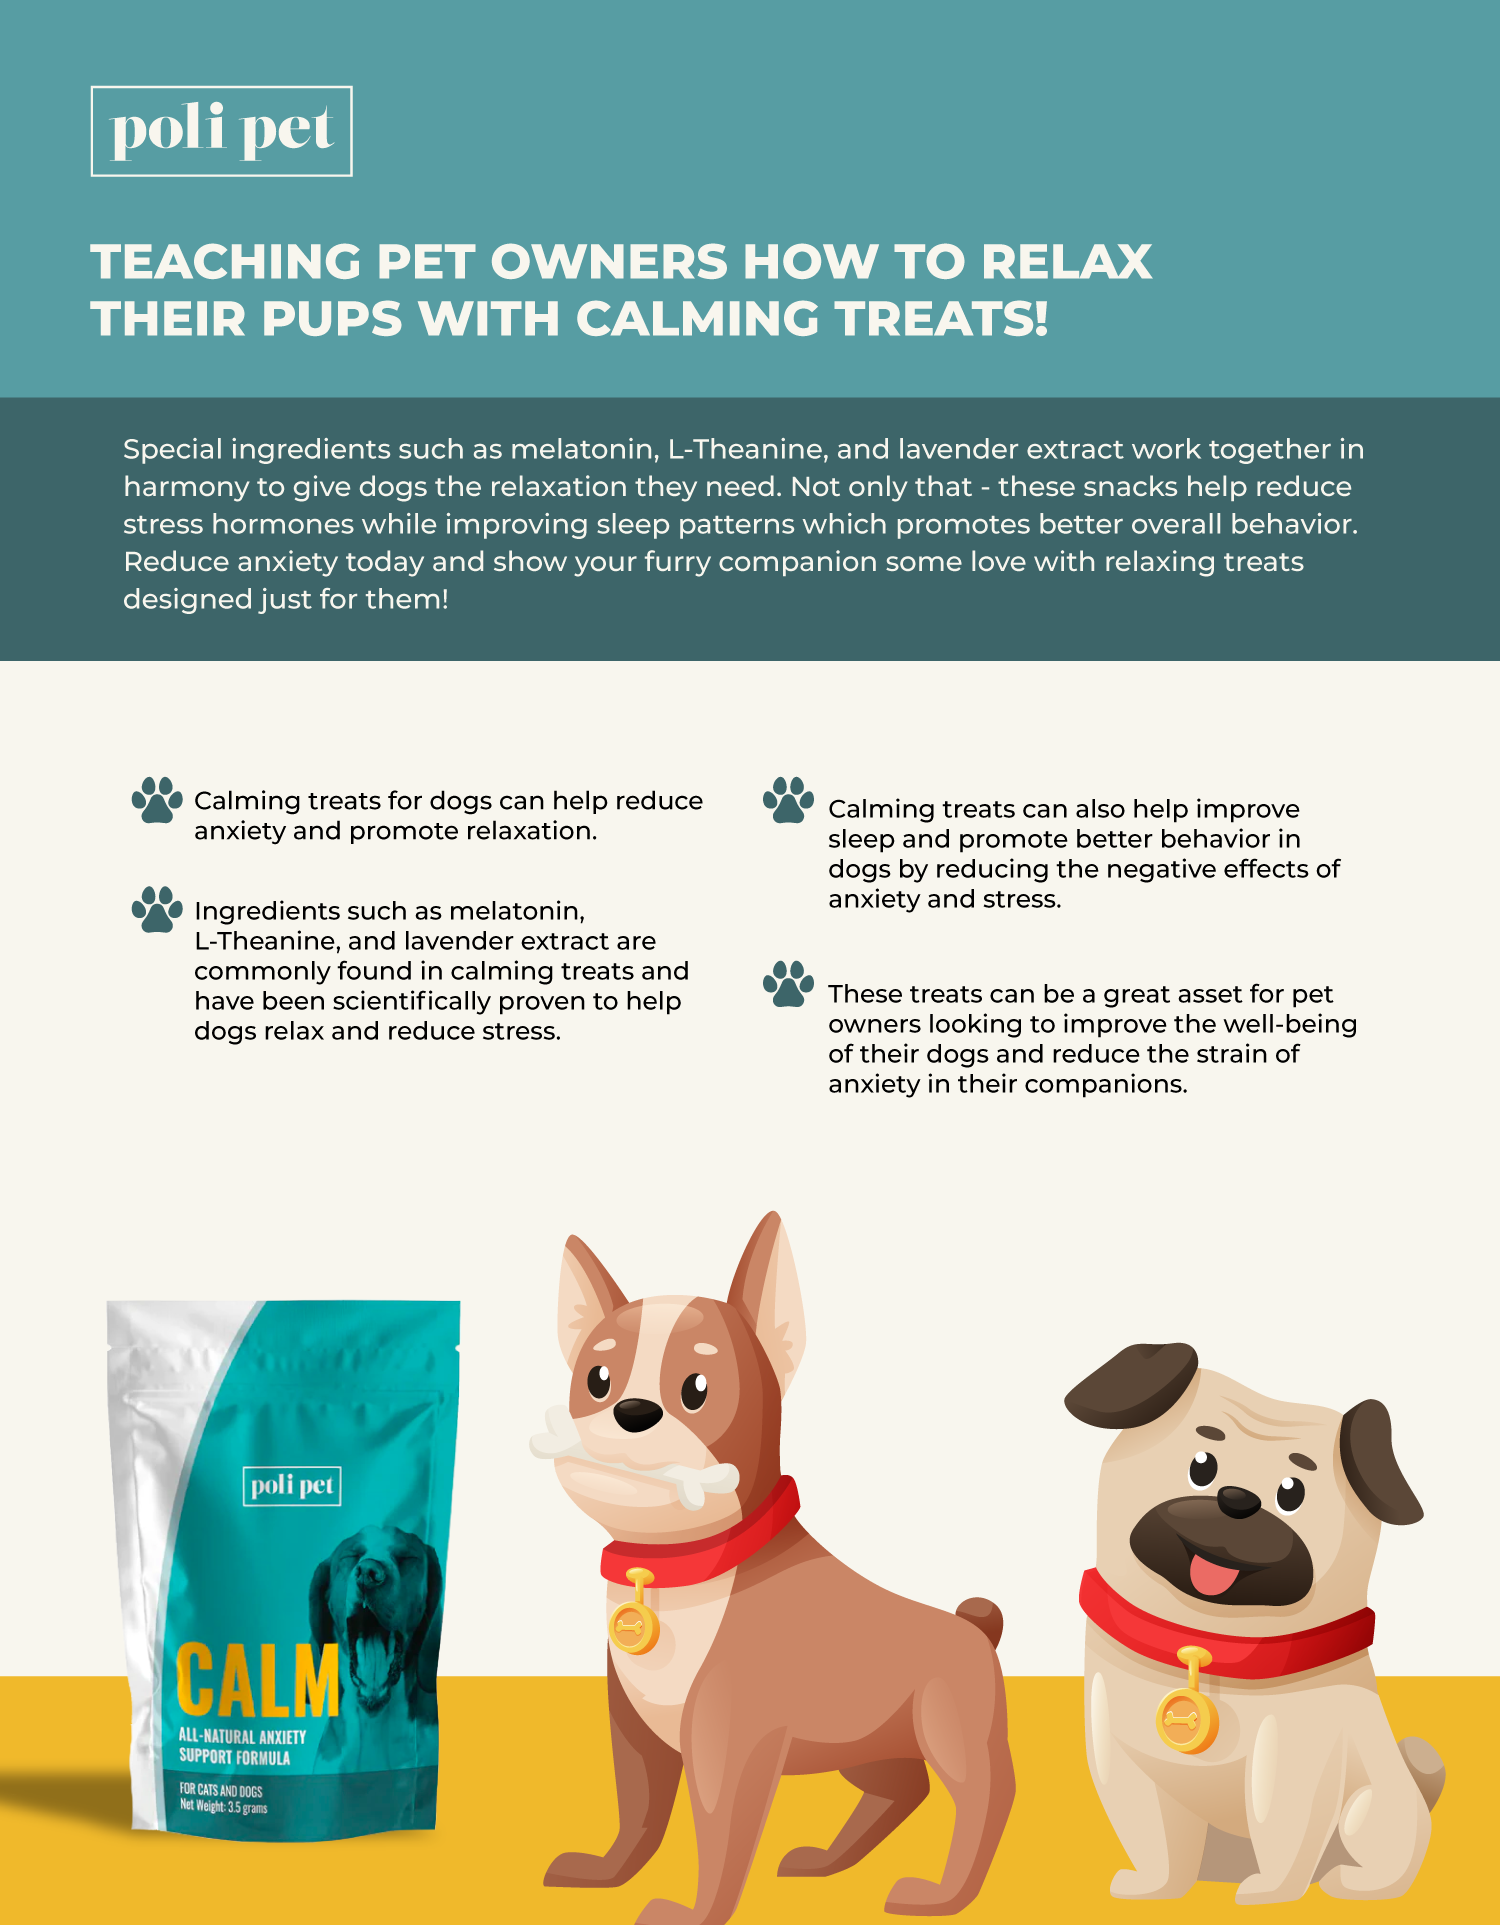 Calming treats good for wellbeing of dogs